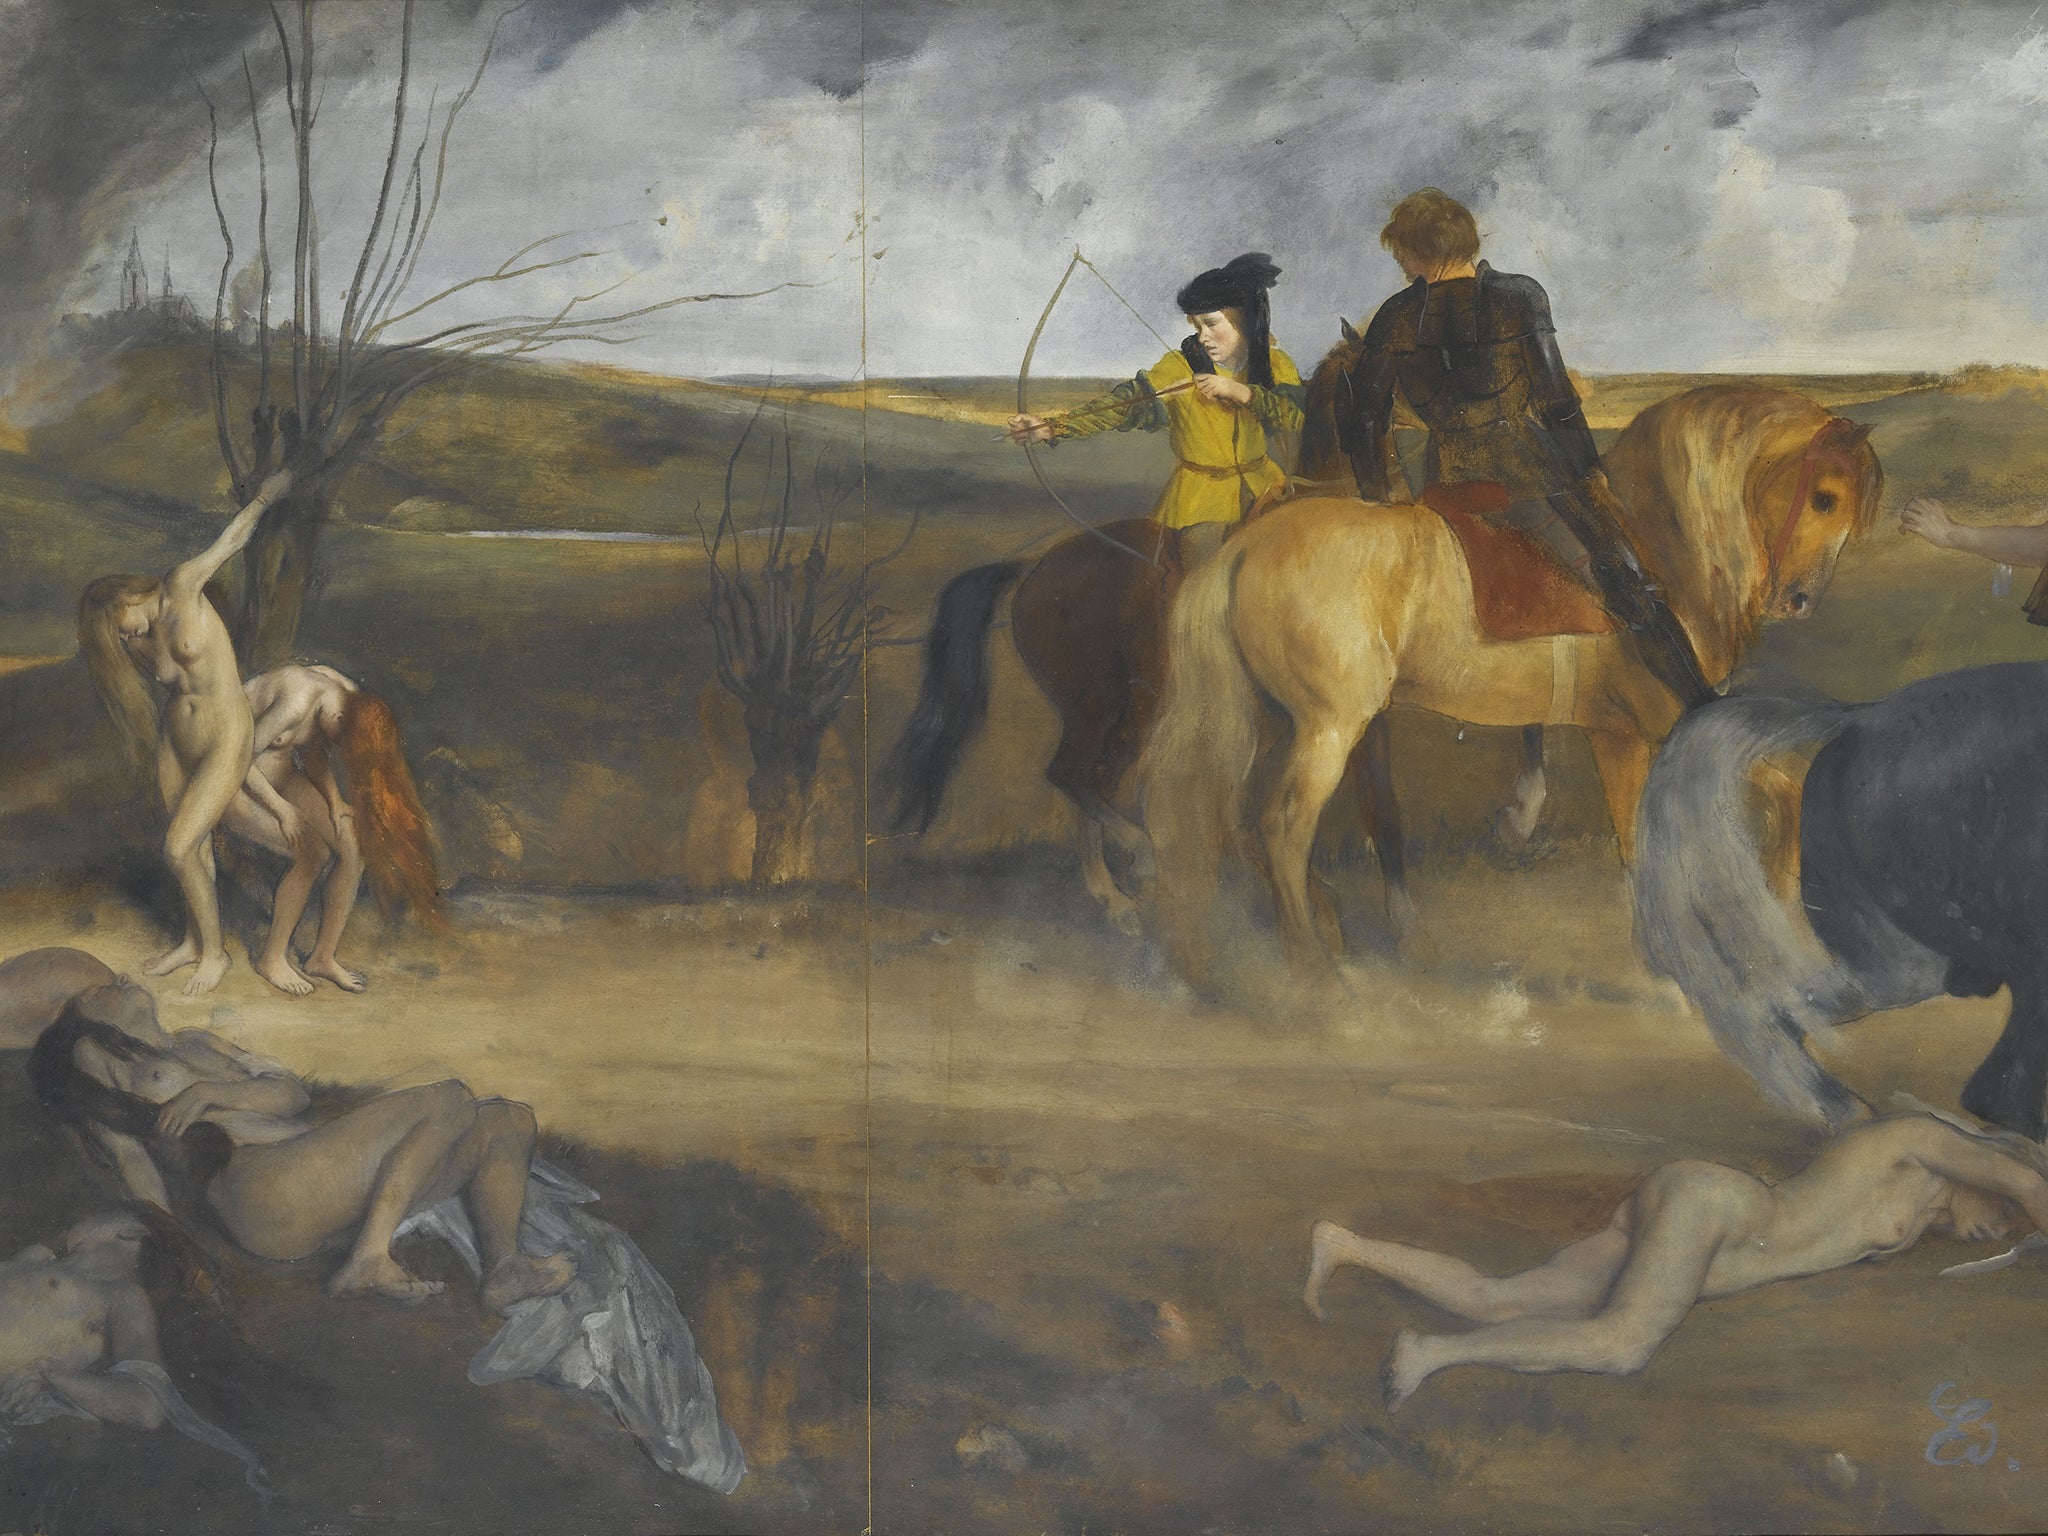 Edgar Degas' 'Scène de guerre au Moyen-âge', 1865, is one of the exhibits said to be inspired by Sade